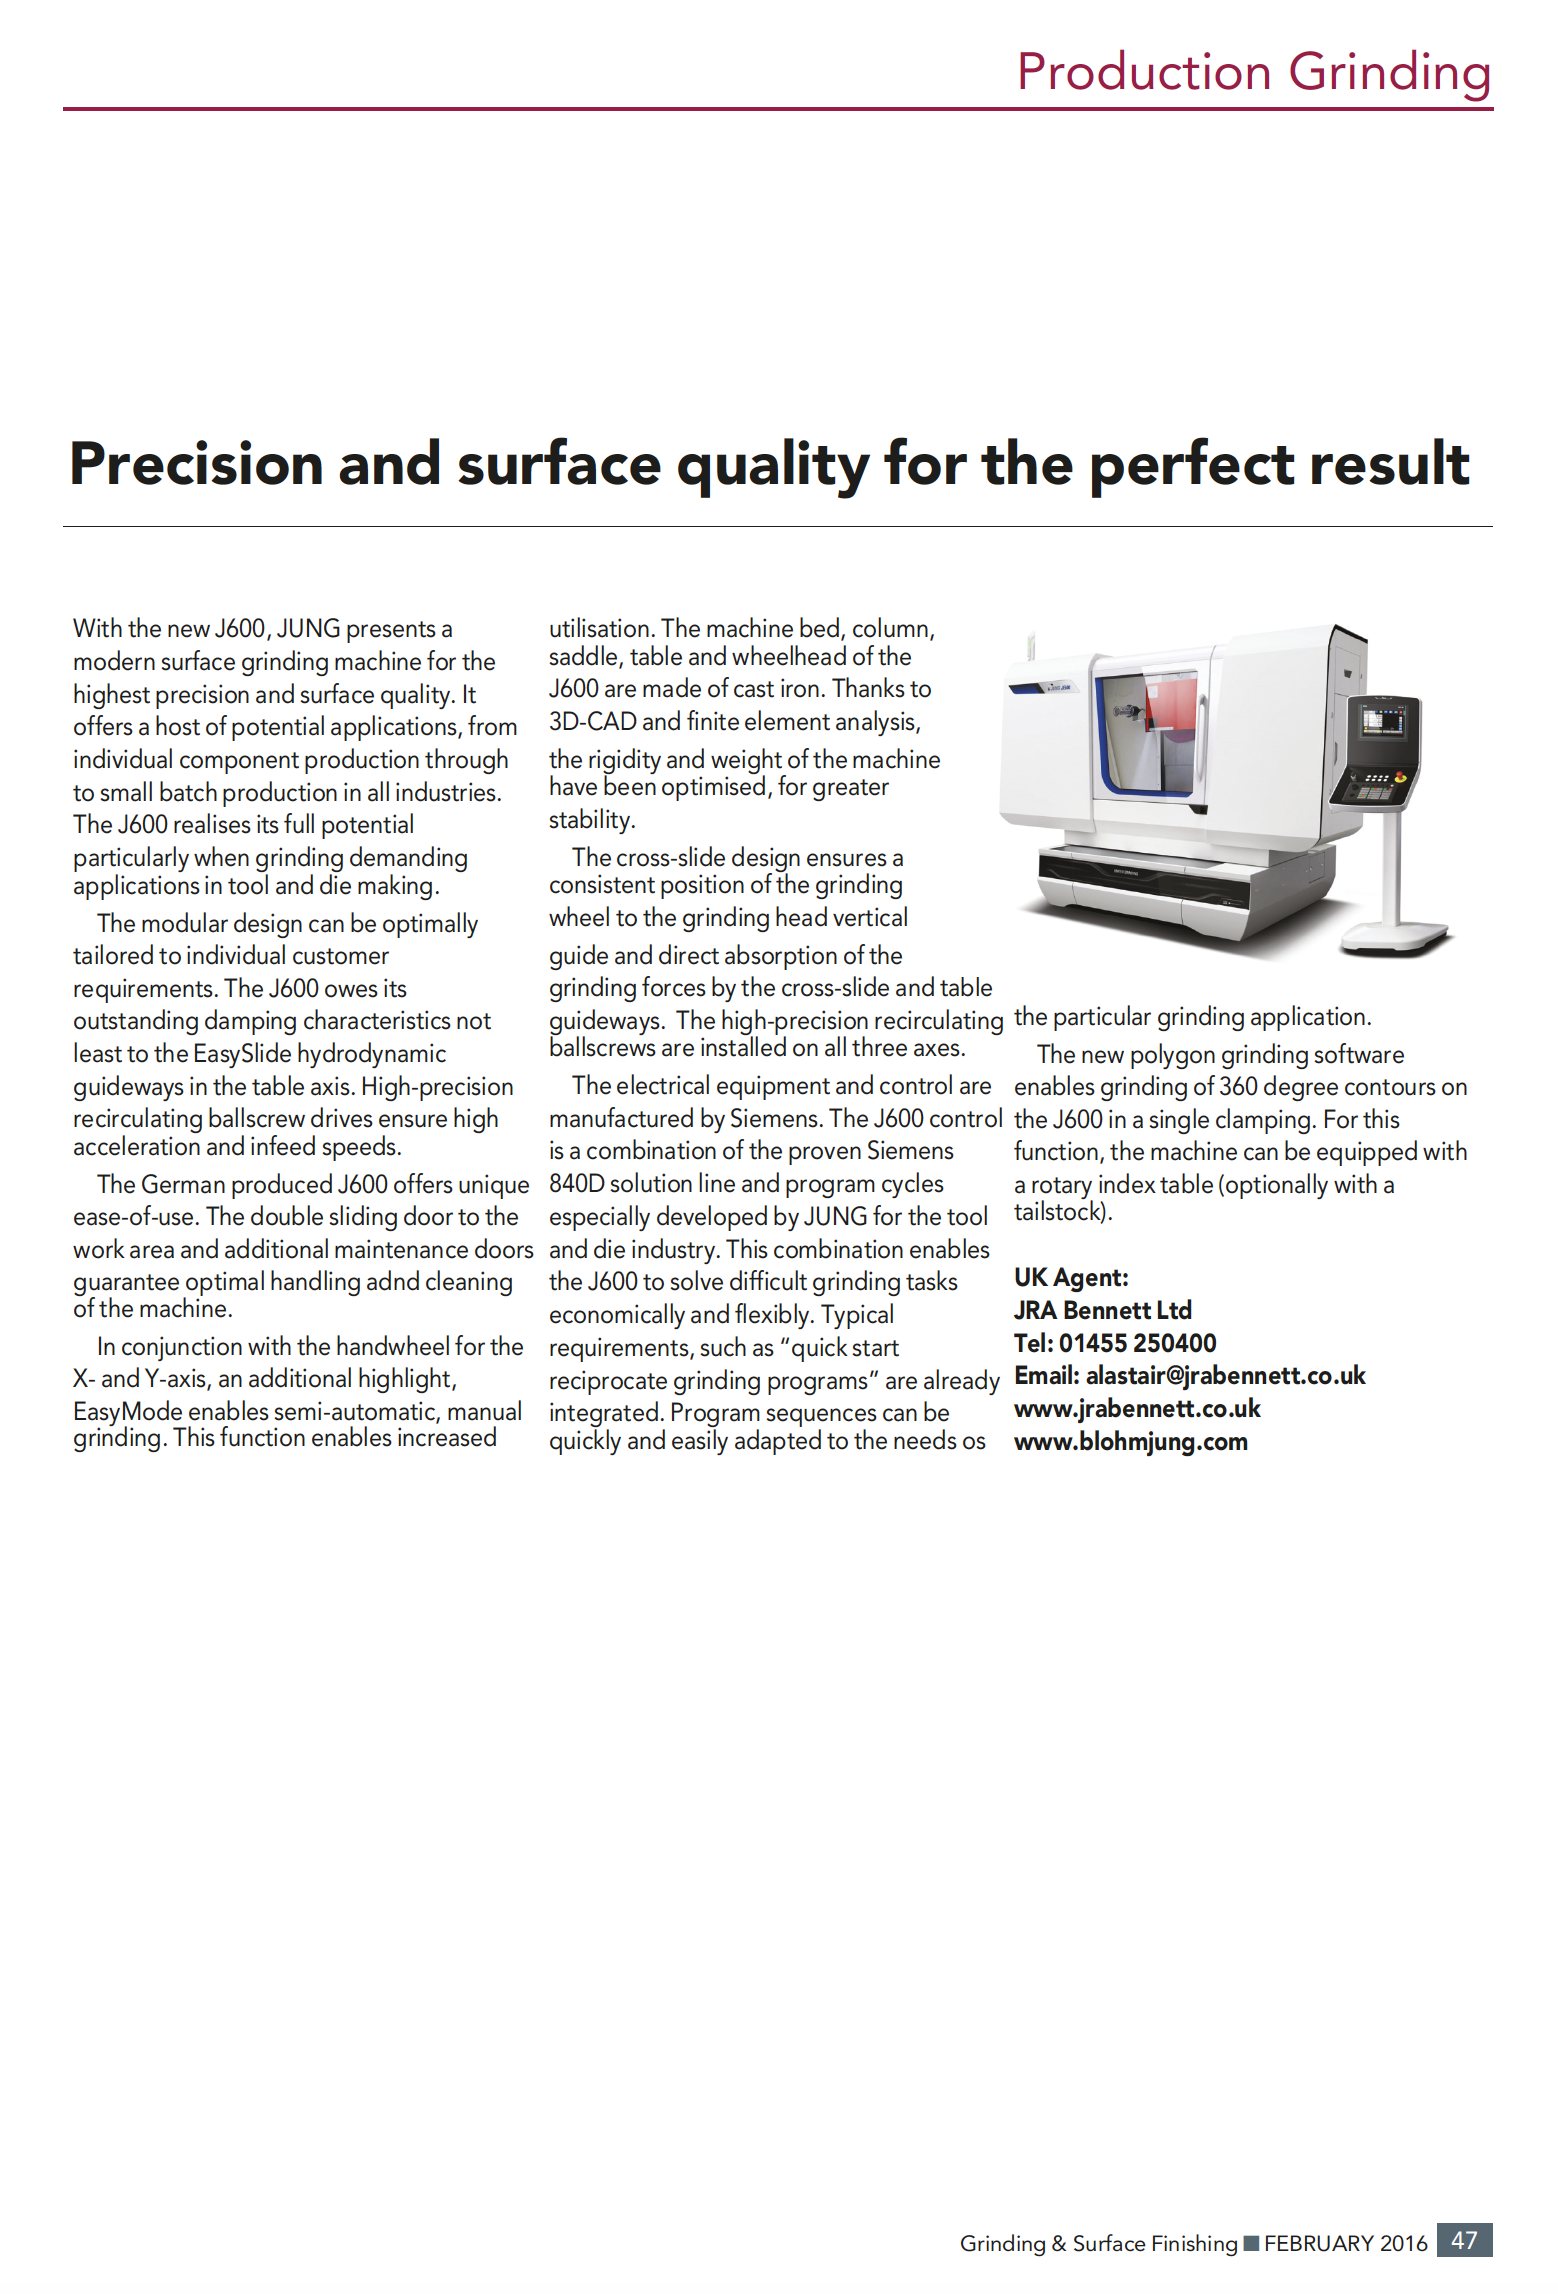 Precision and surface quality for the perfect result